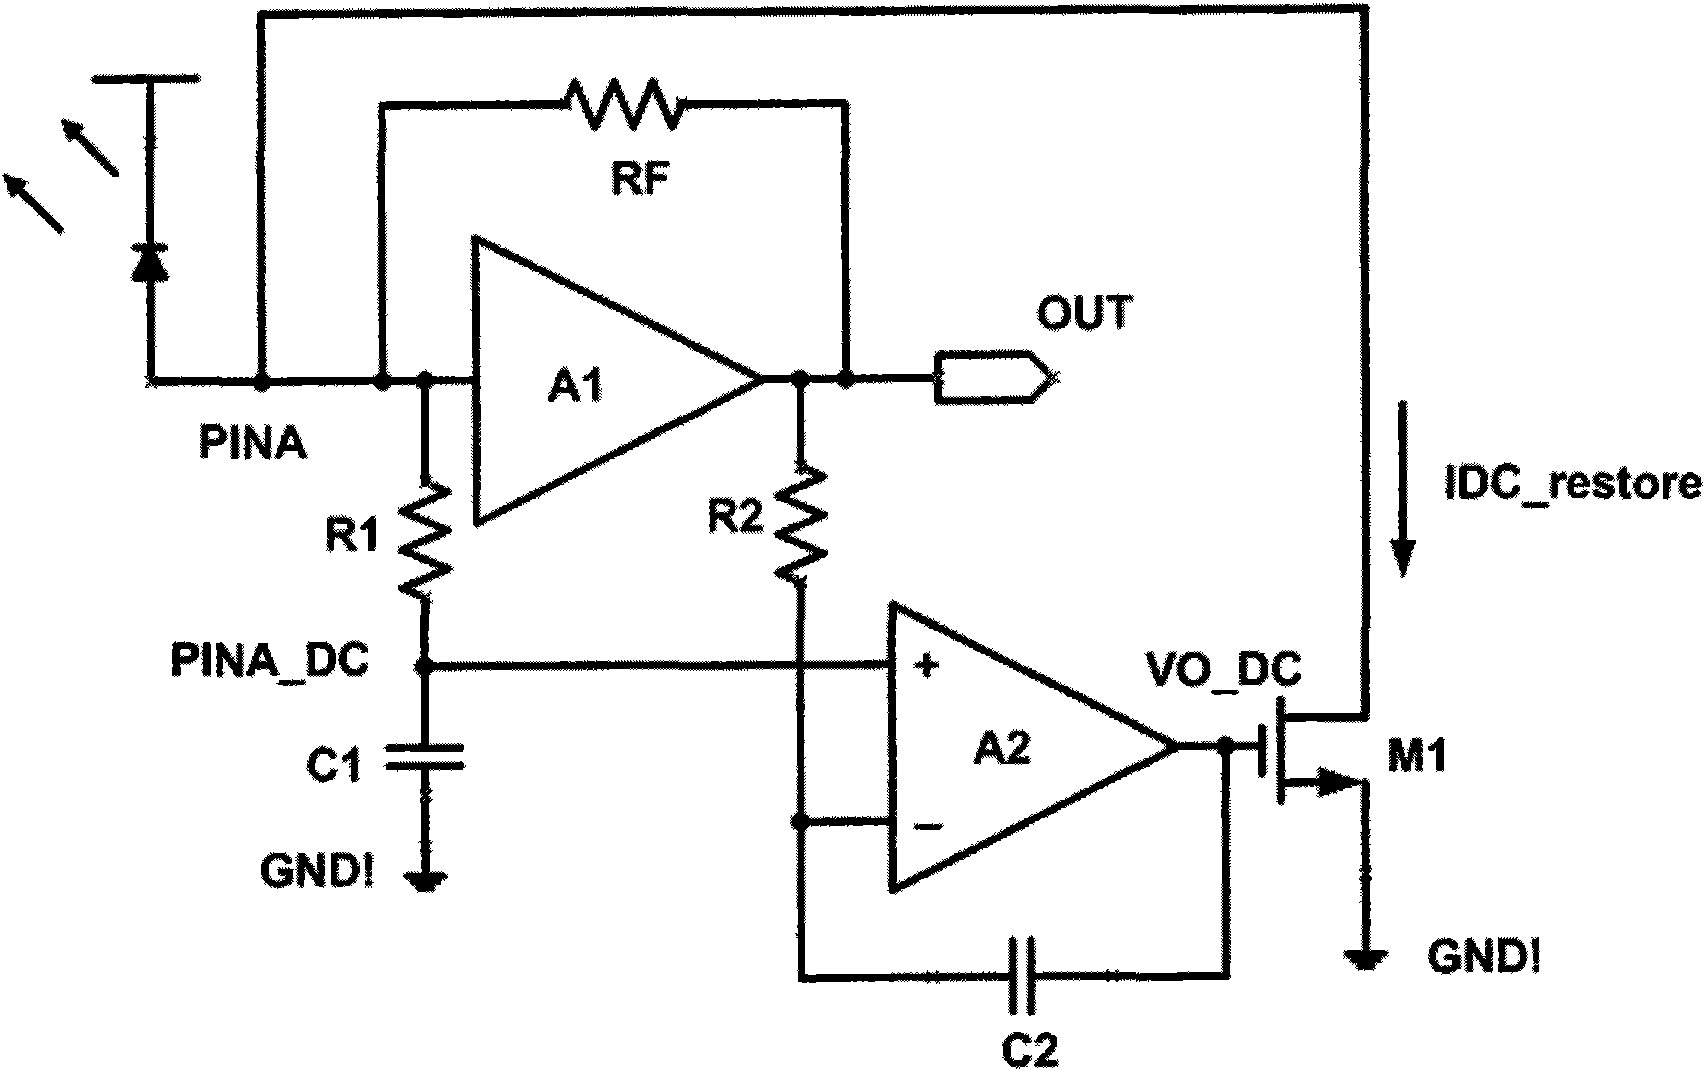 Direct-current (DC) restoration and DC monitoring circuit